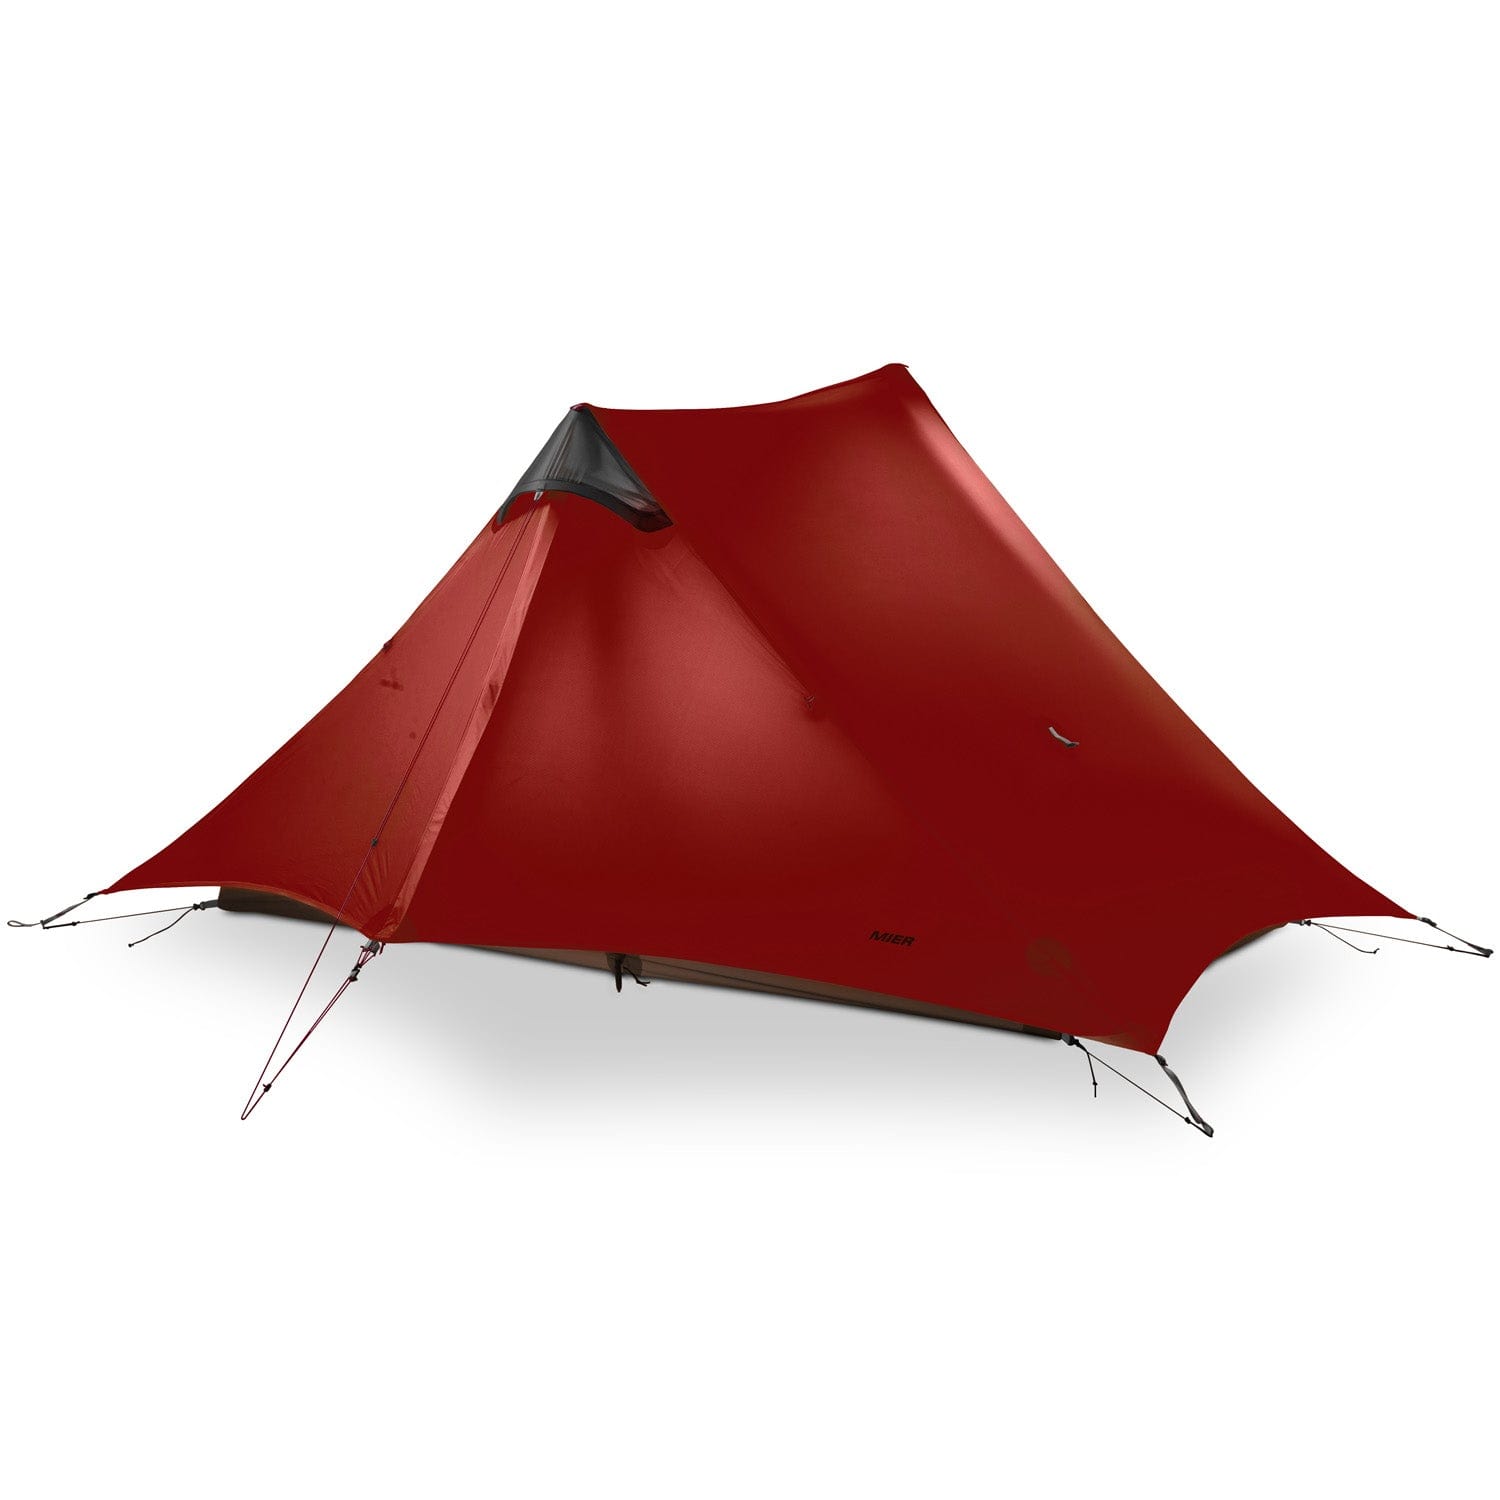 Lanshan 2 Person Ultralight Backpacking Tent Camping Pole Tent Lanshan Tent Darkred / 2-Person MIER